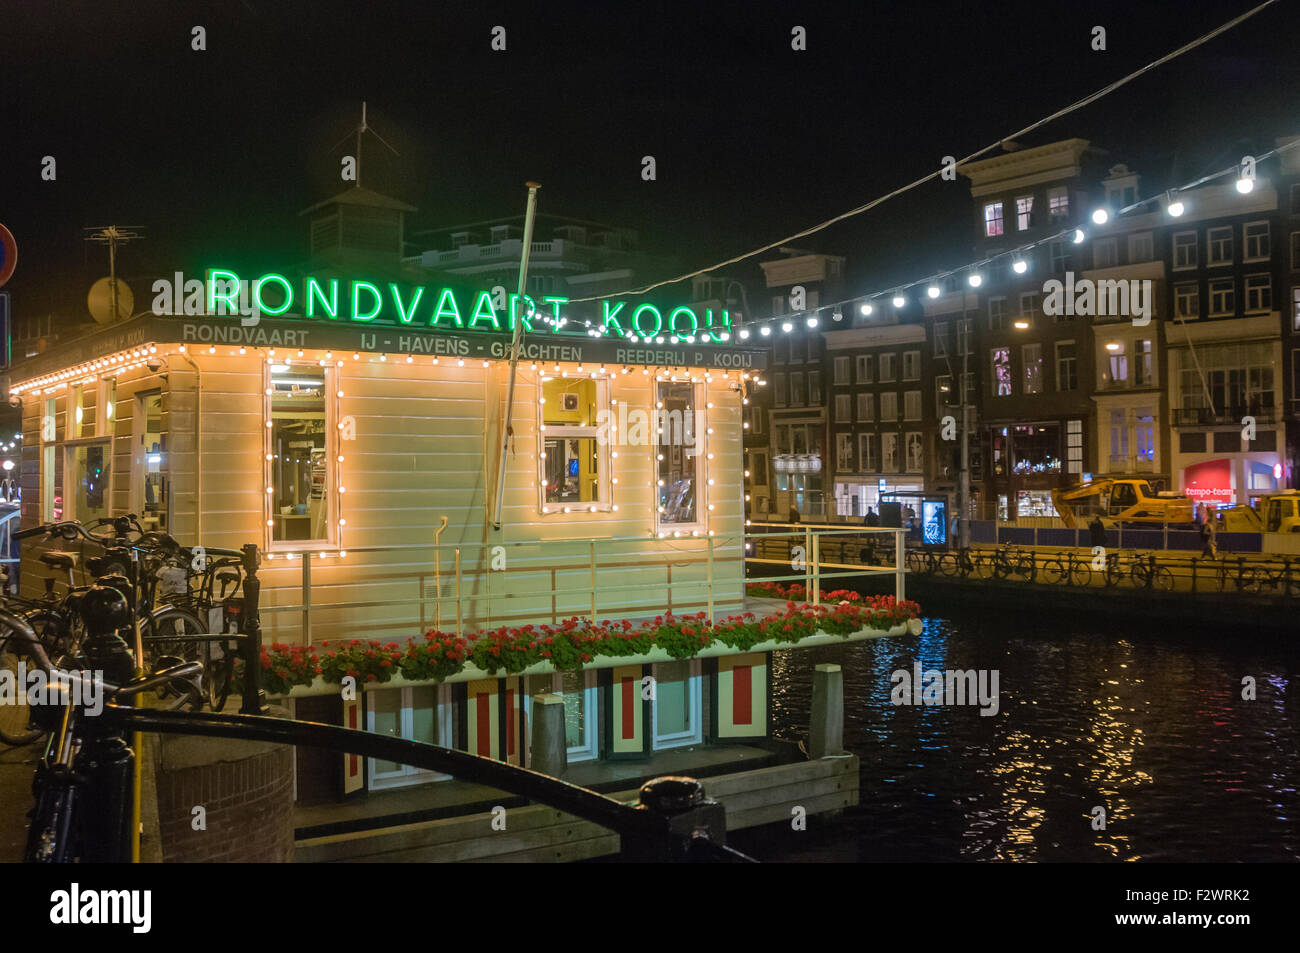 Office of the Rondvaart Koou canalboat tours at night, Amsterdam. Stock Photo